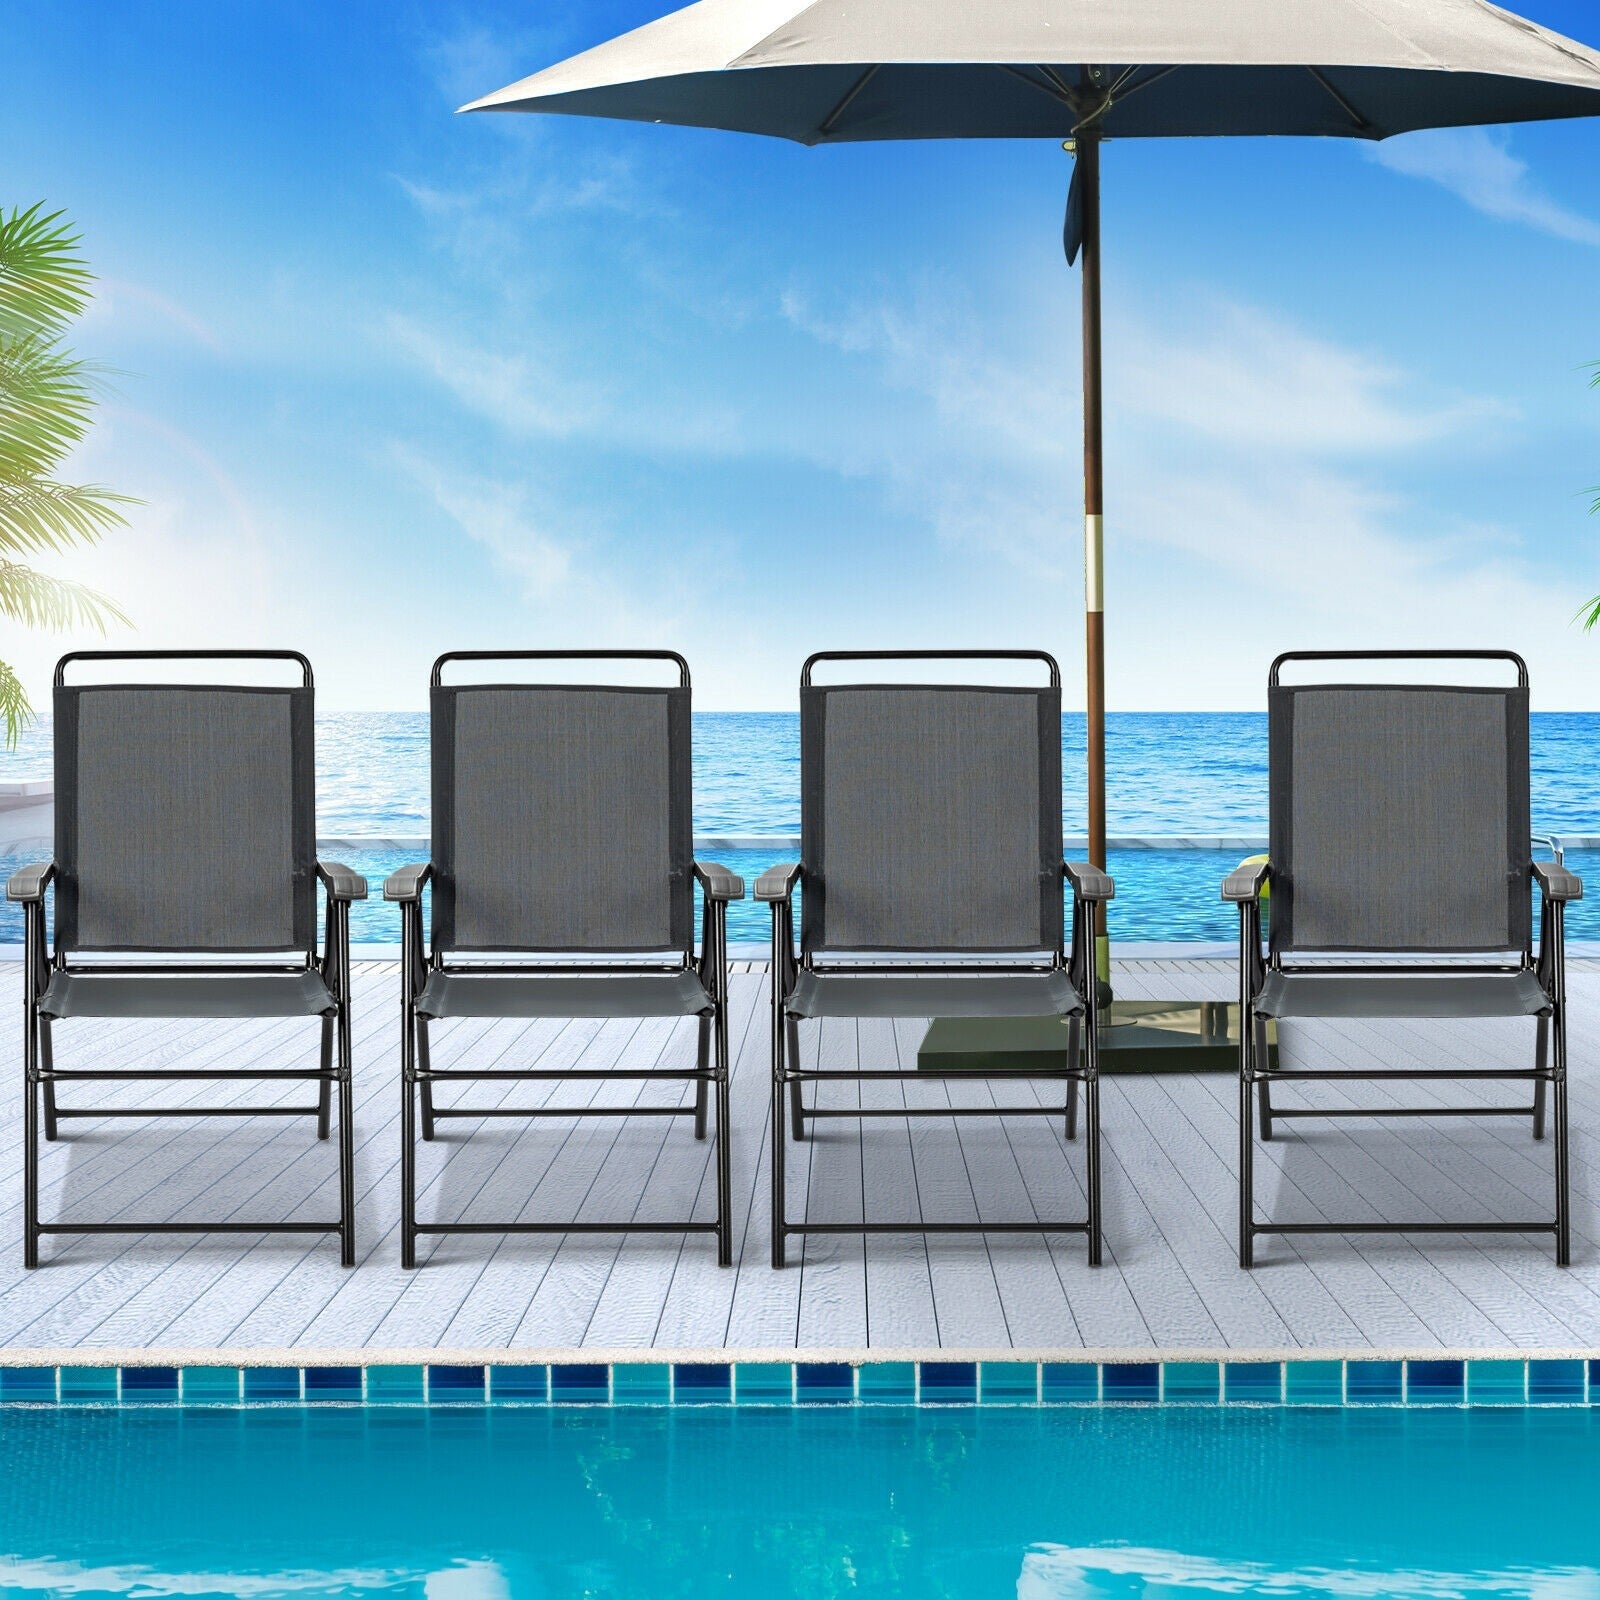 Set of 4 Folding Patio Chairs, Patio Dining Chairs